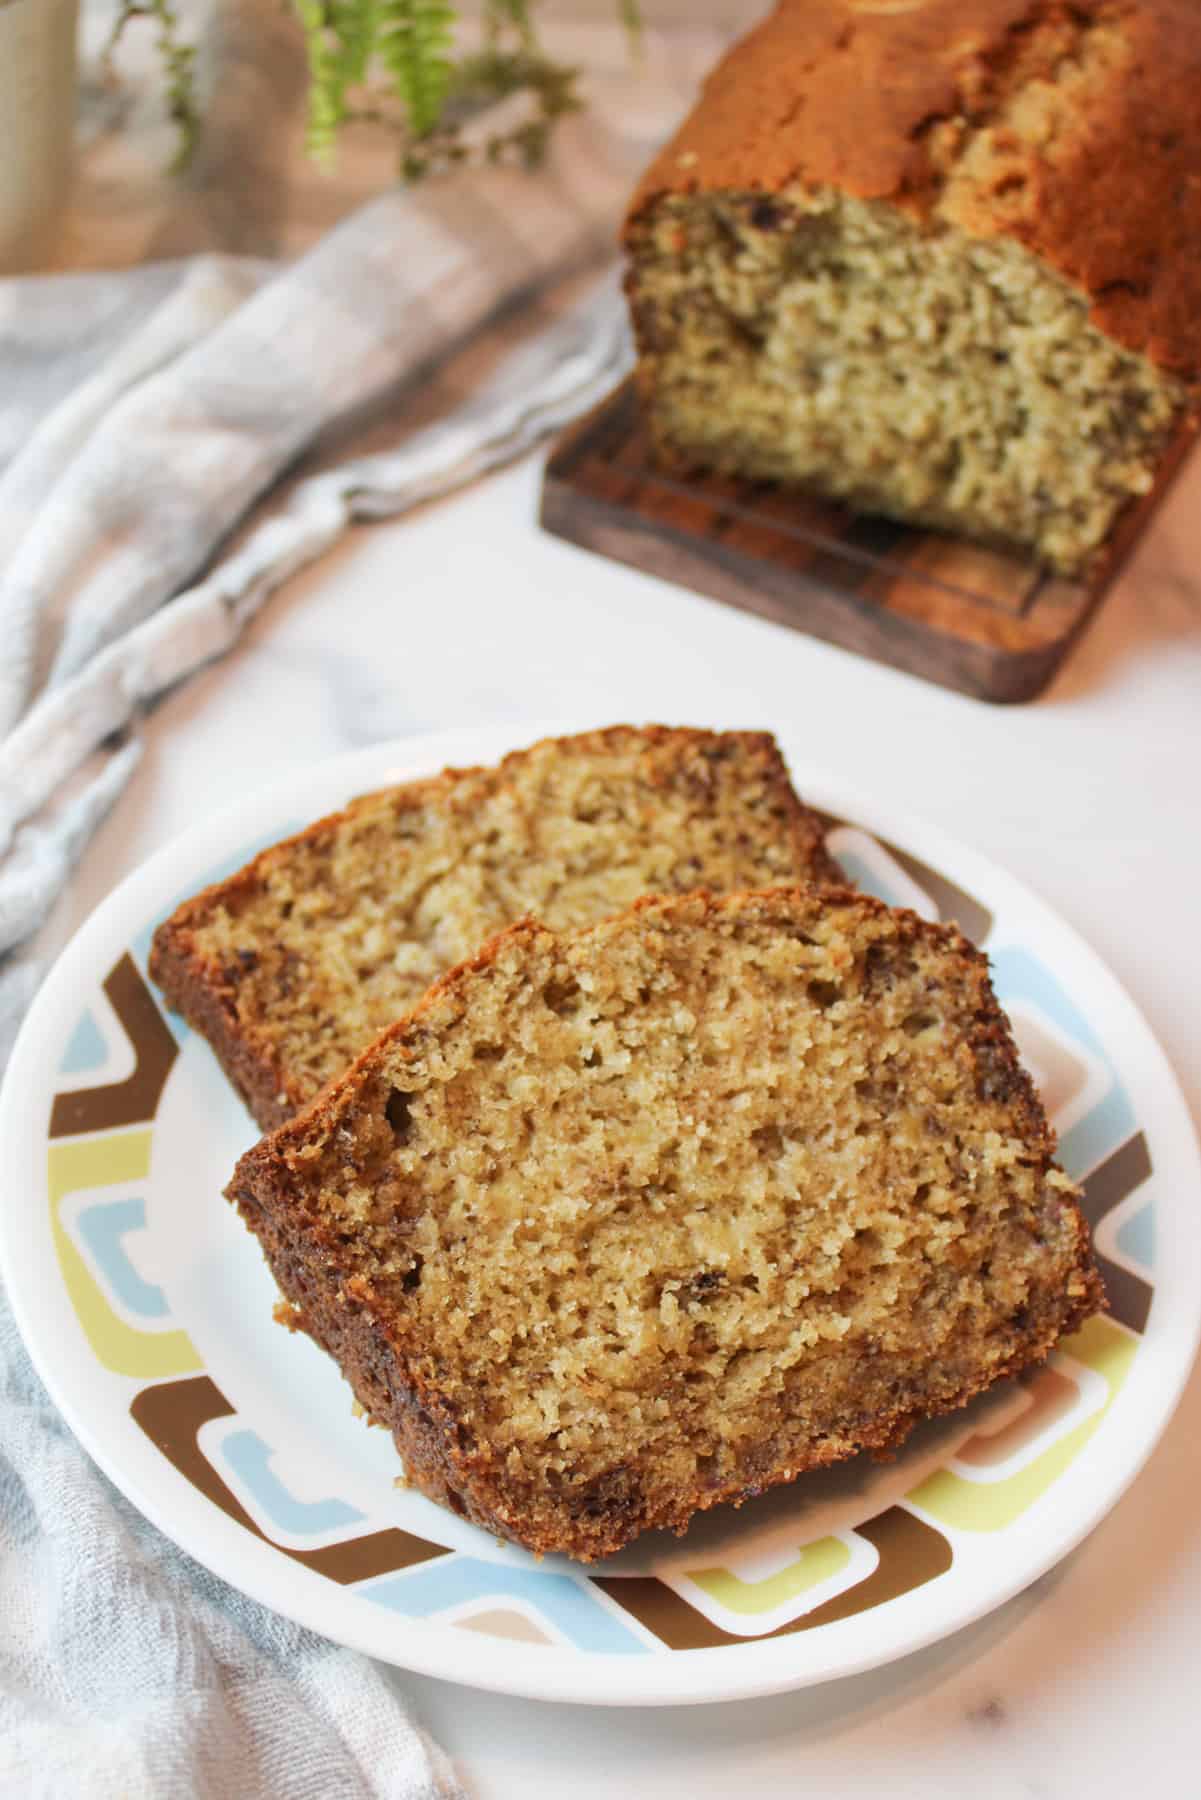 two slices of banana bread on a small plate with more on a wooden cutting board in the background